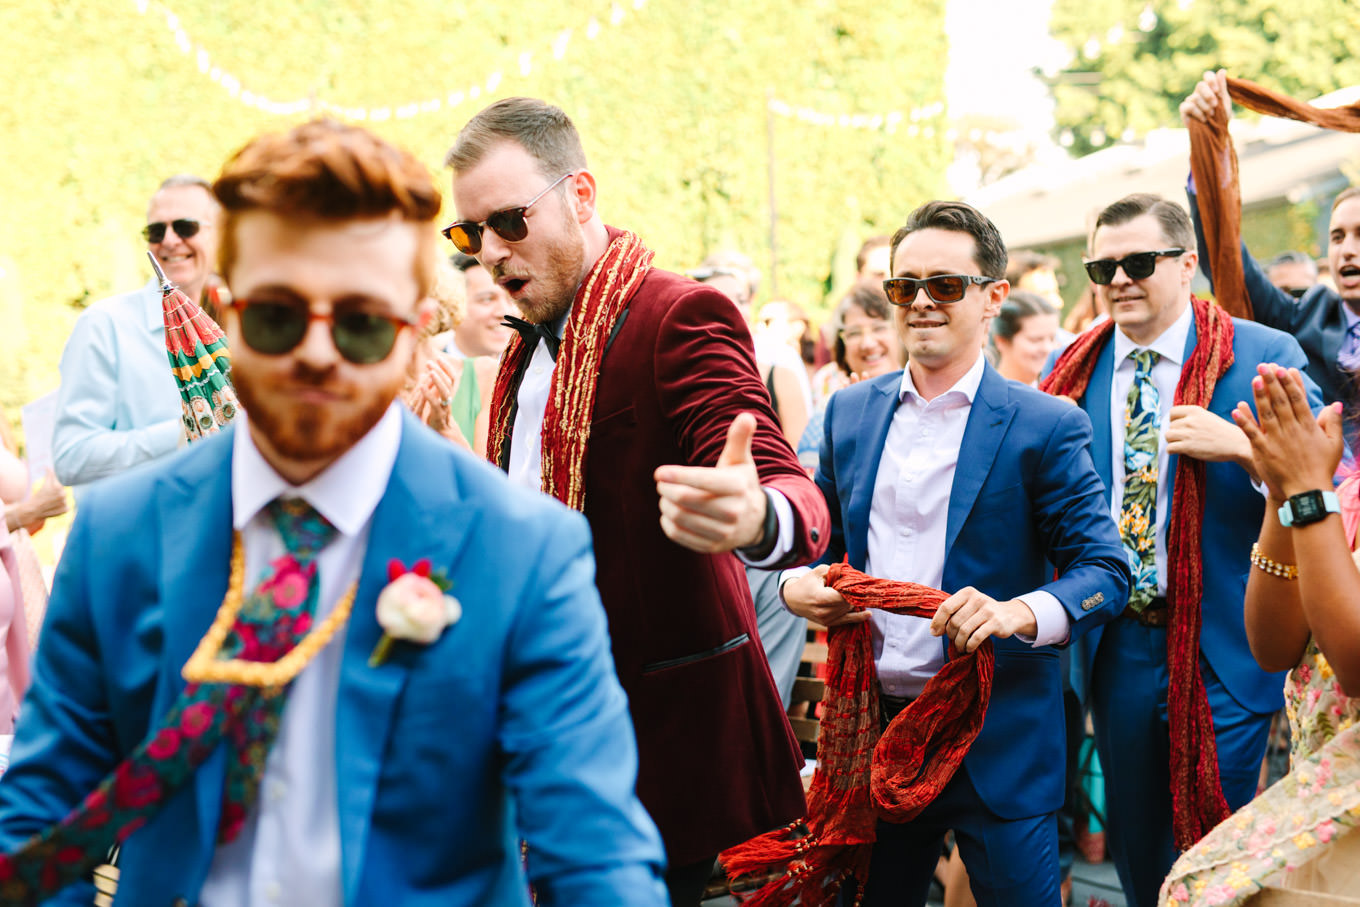 Groom and groomsmen entering wedding ceremony. Two Disney artists create a unique and colorful Indian Fusion wedding at The Fig House Los Angeles, featured on Green Wedding Shoes. | Colorful and elevated wedding inspiration for fun-loving couples in Southern California | #indianwedding #indianfusionwedding #thefighouse #losangeleswedding   Source: Mary Costa Photography | Los Angeles